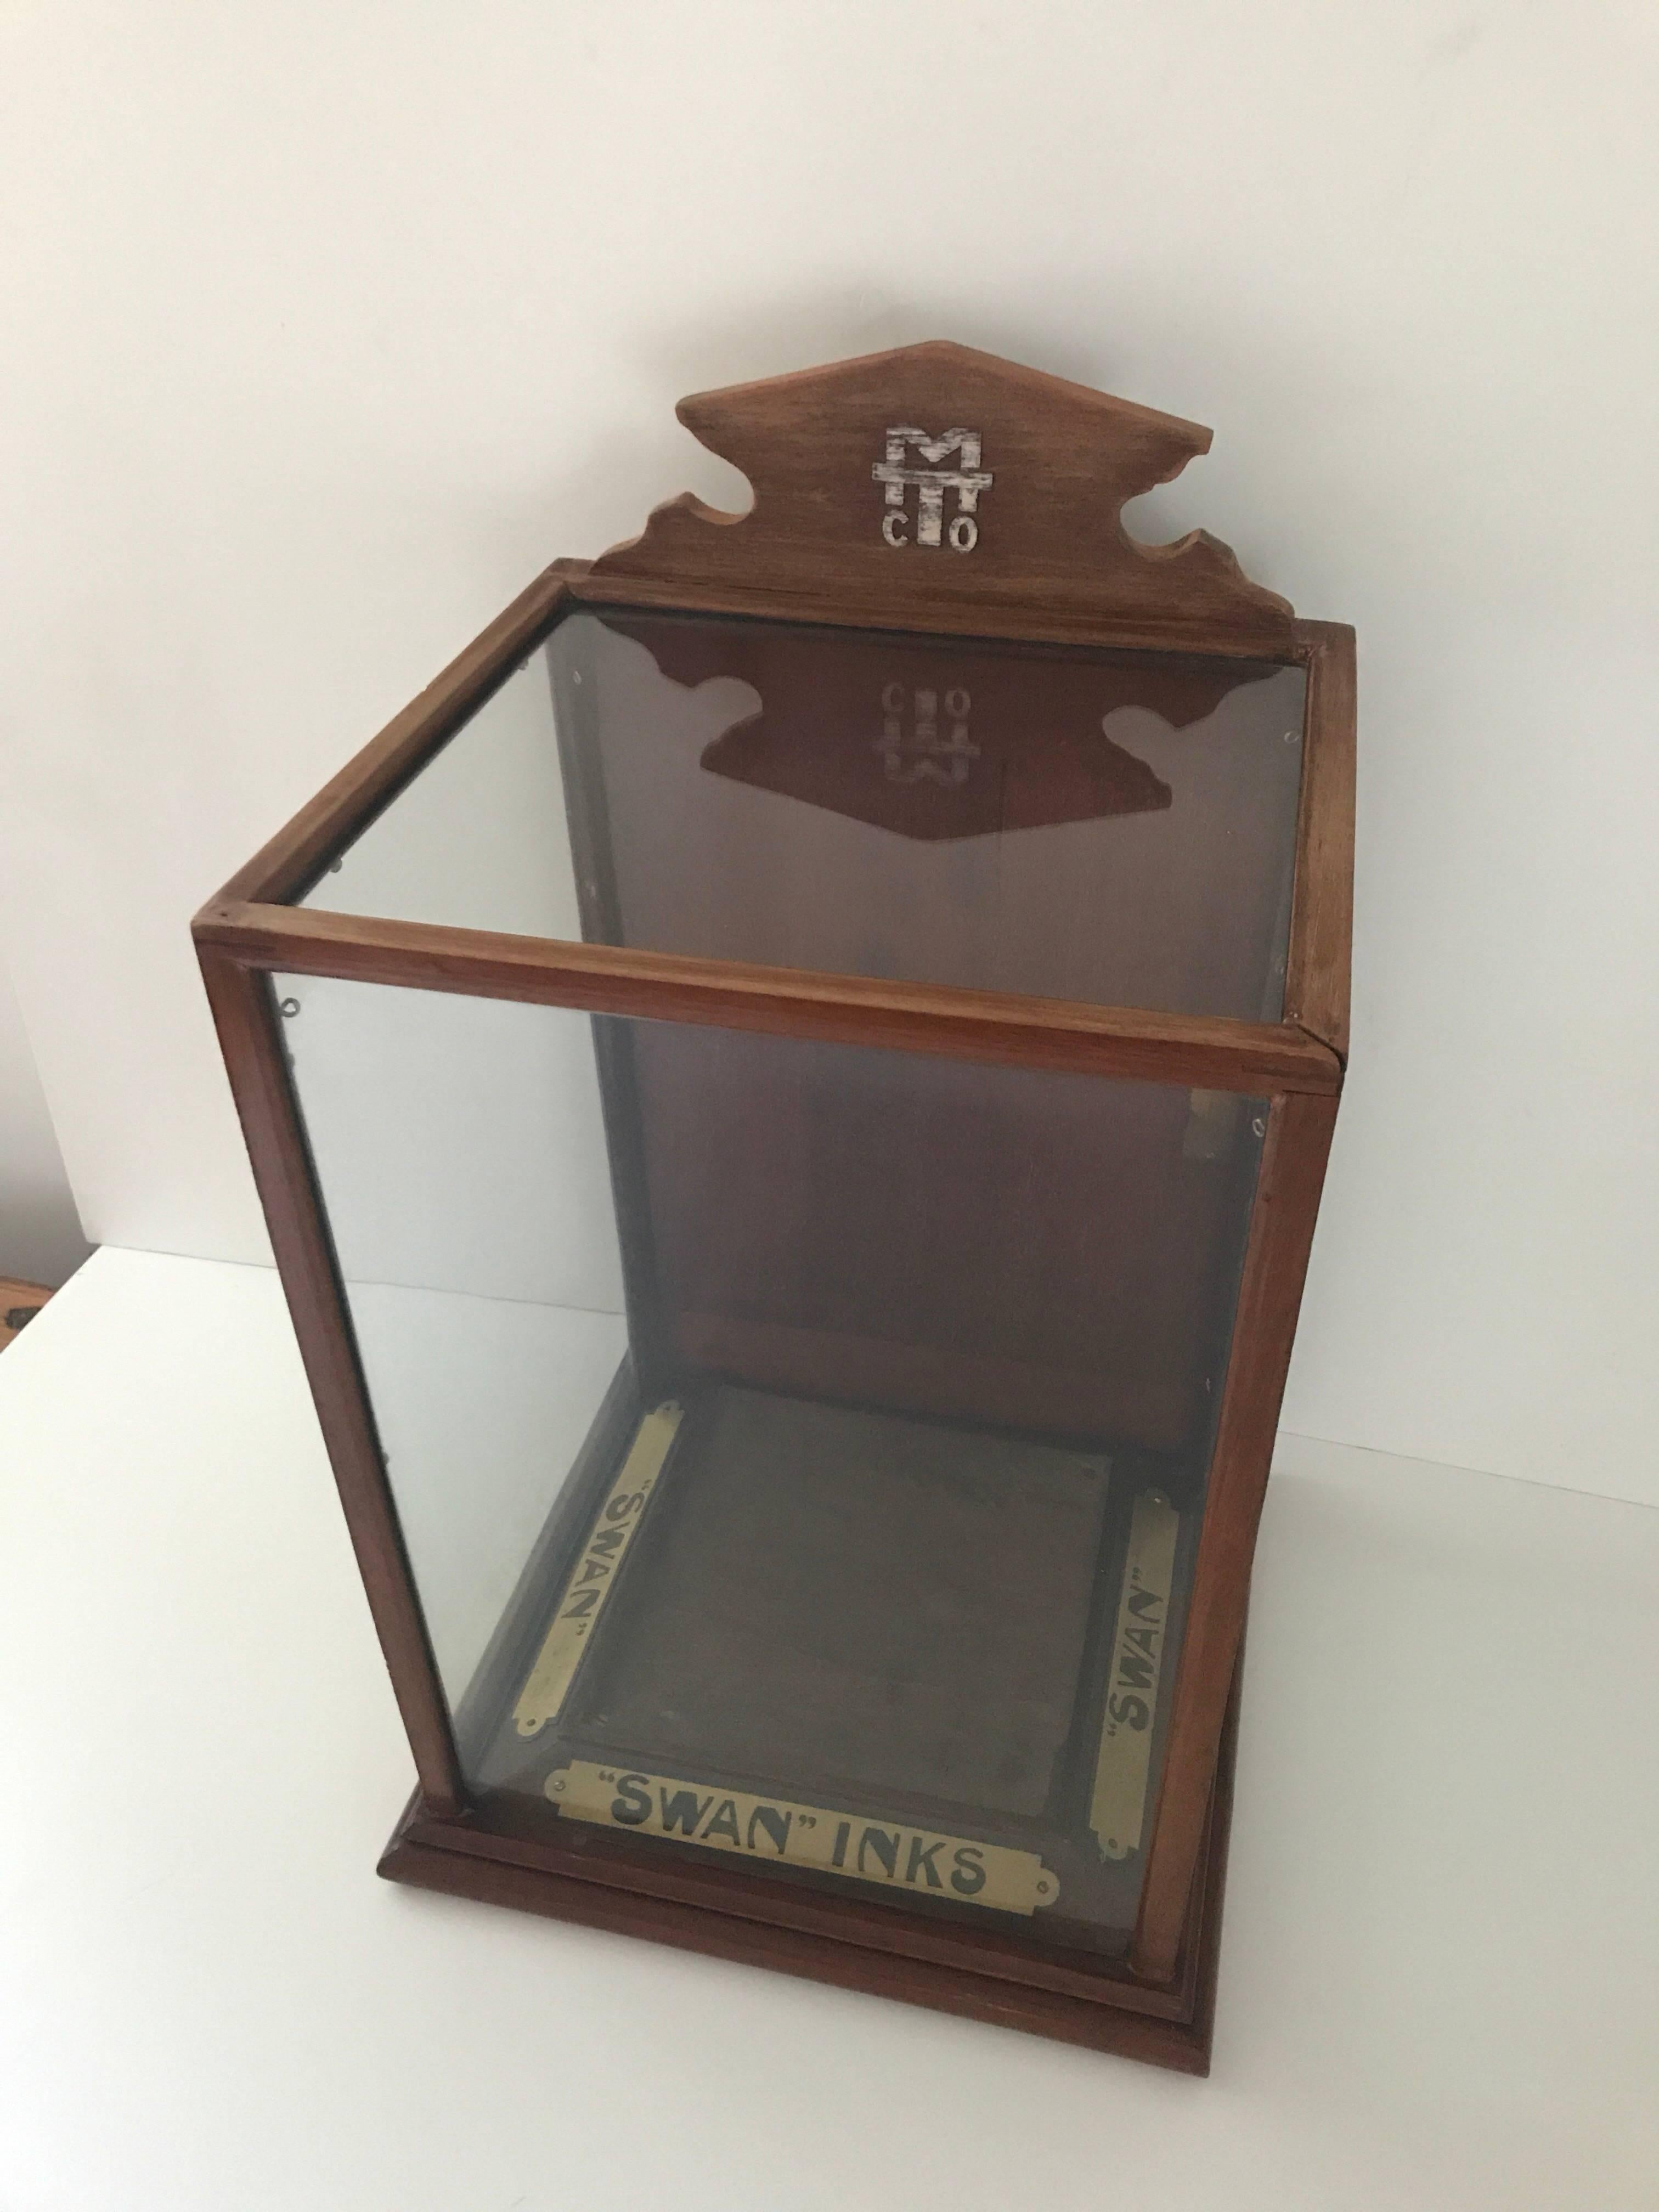 Rare display cabinet or desk display for swan ink early 20th century. A beautiful oak and glass display cabinet made for displaying pens and pencils for swan ink in the early 20th c. The display is missing the key and the knob for the door at the